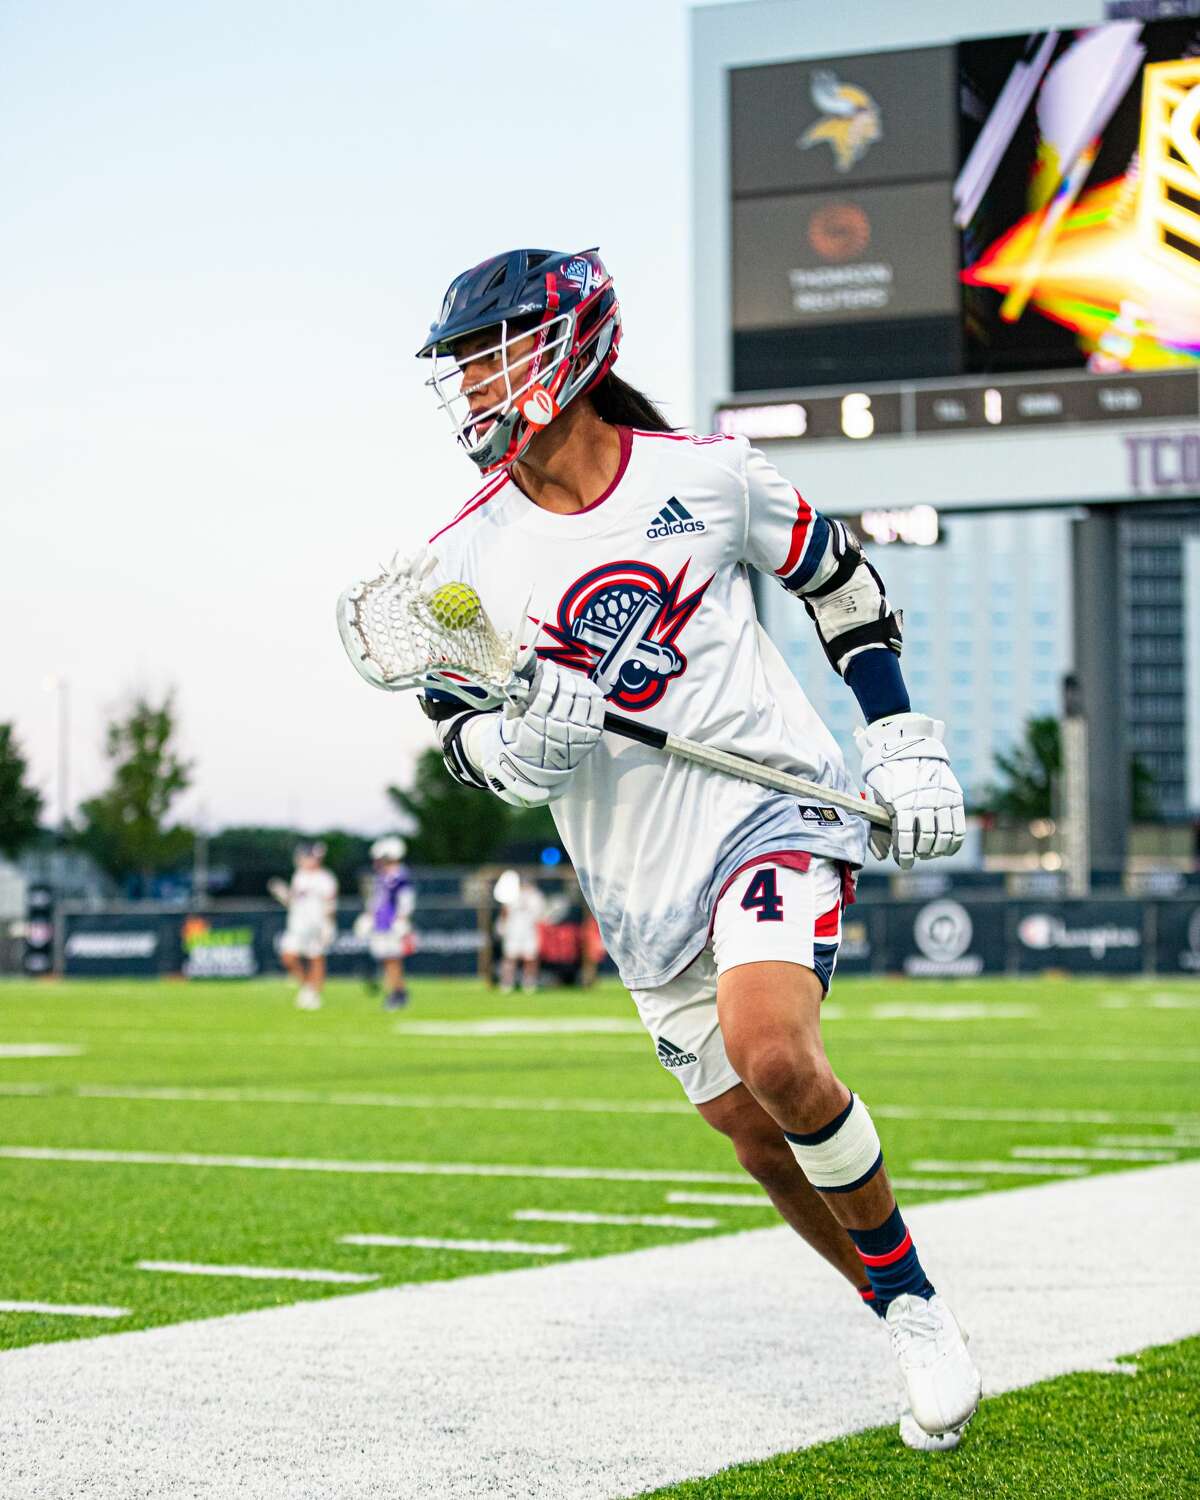 Lyle Thompson, now with the Cannons in the Premier Lacrosse League, scored an NCAA Division I record 400 points during his University at Albany career.